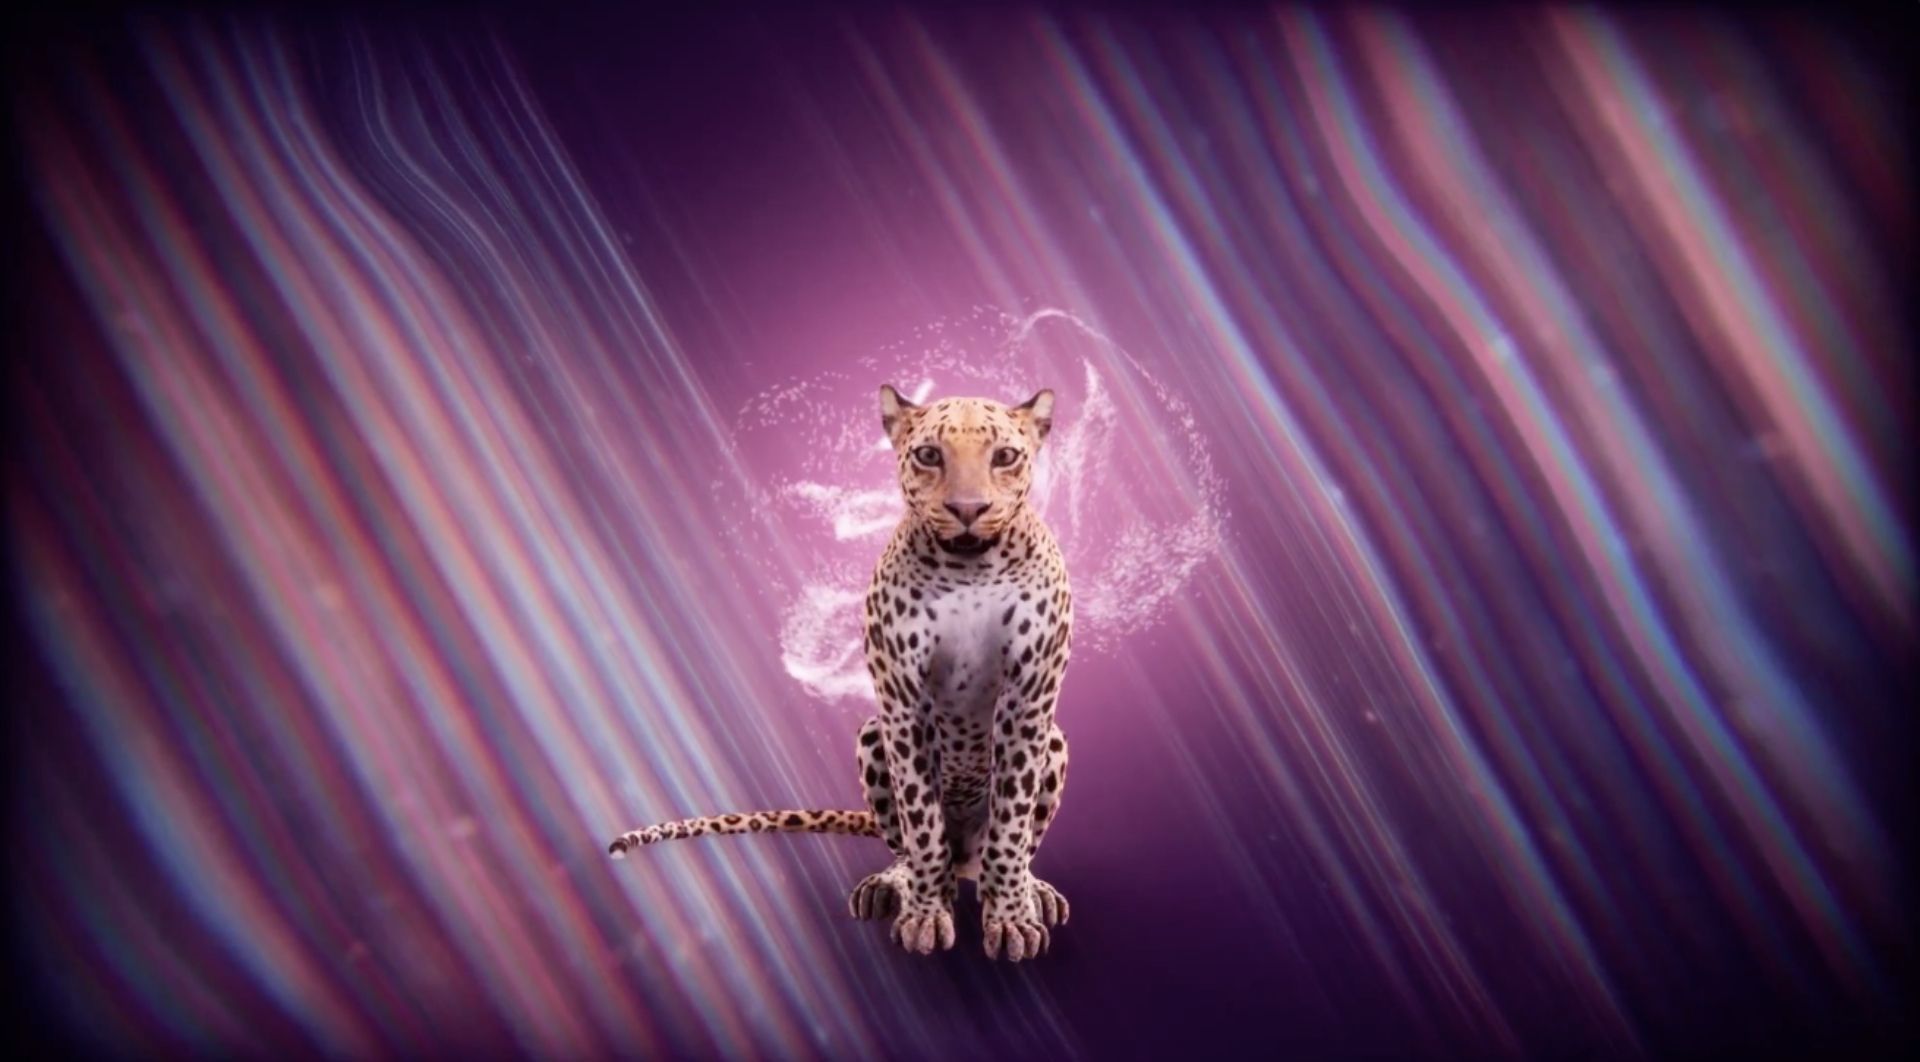 A digital leopard against a pink and purple background